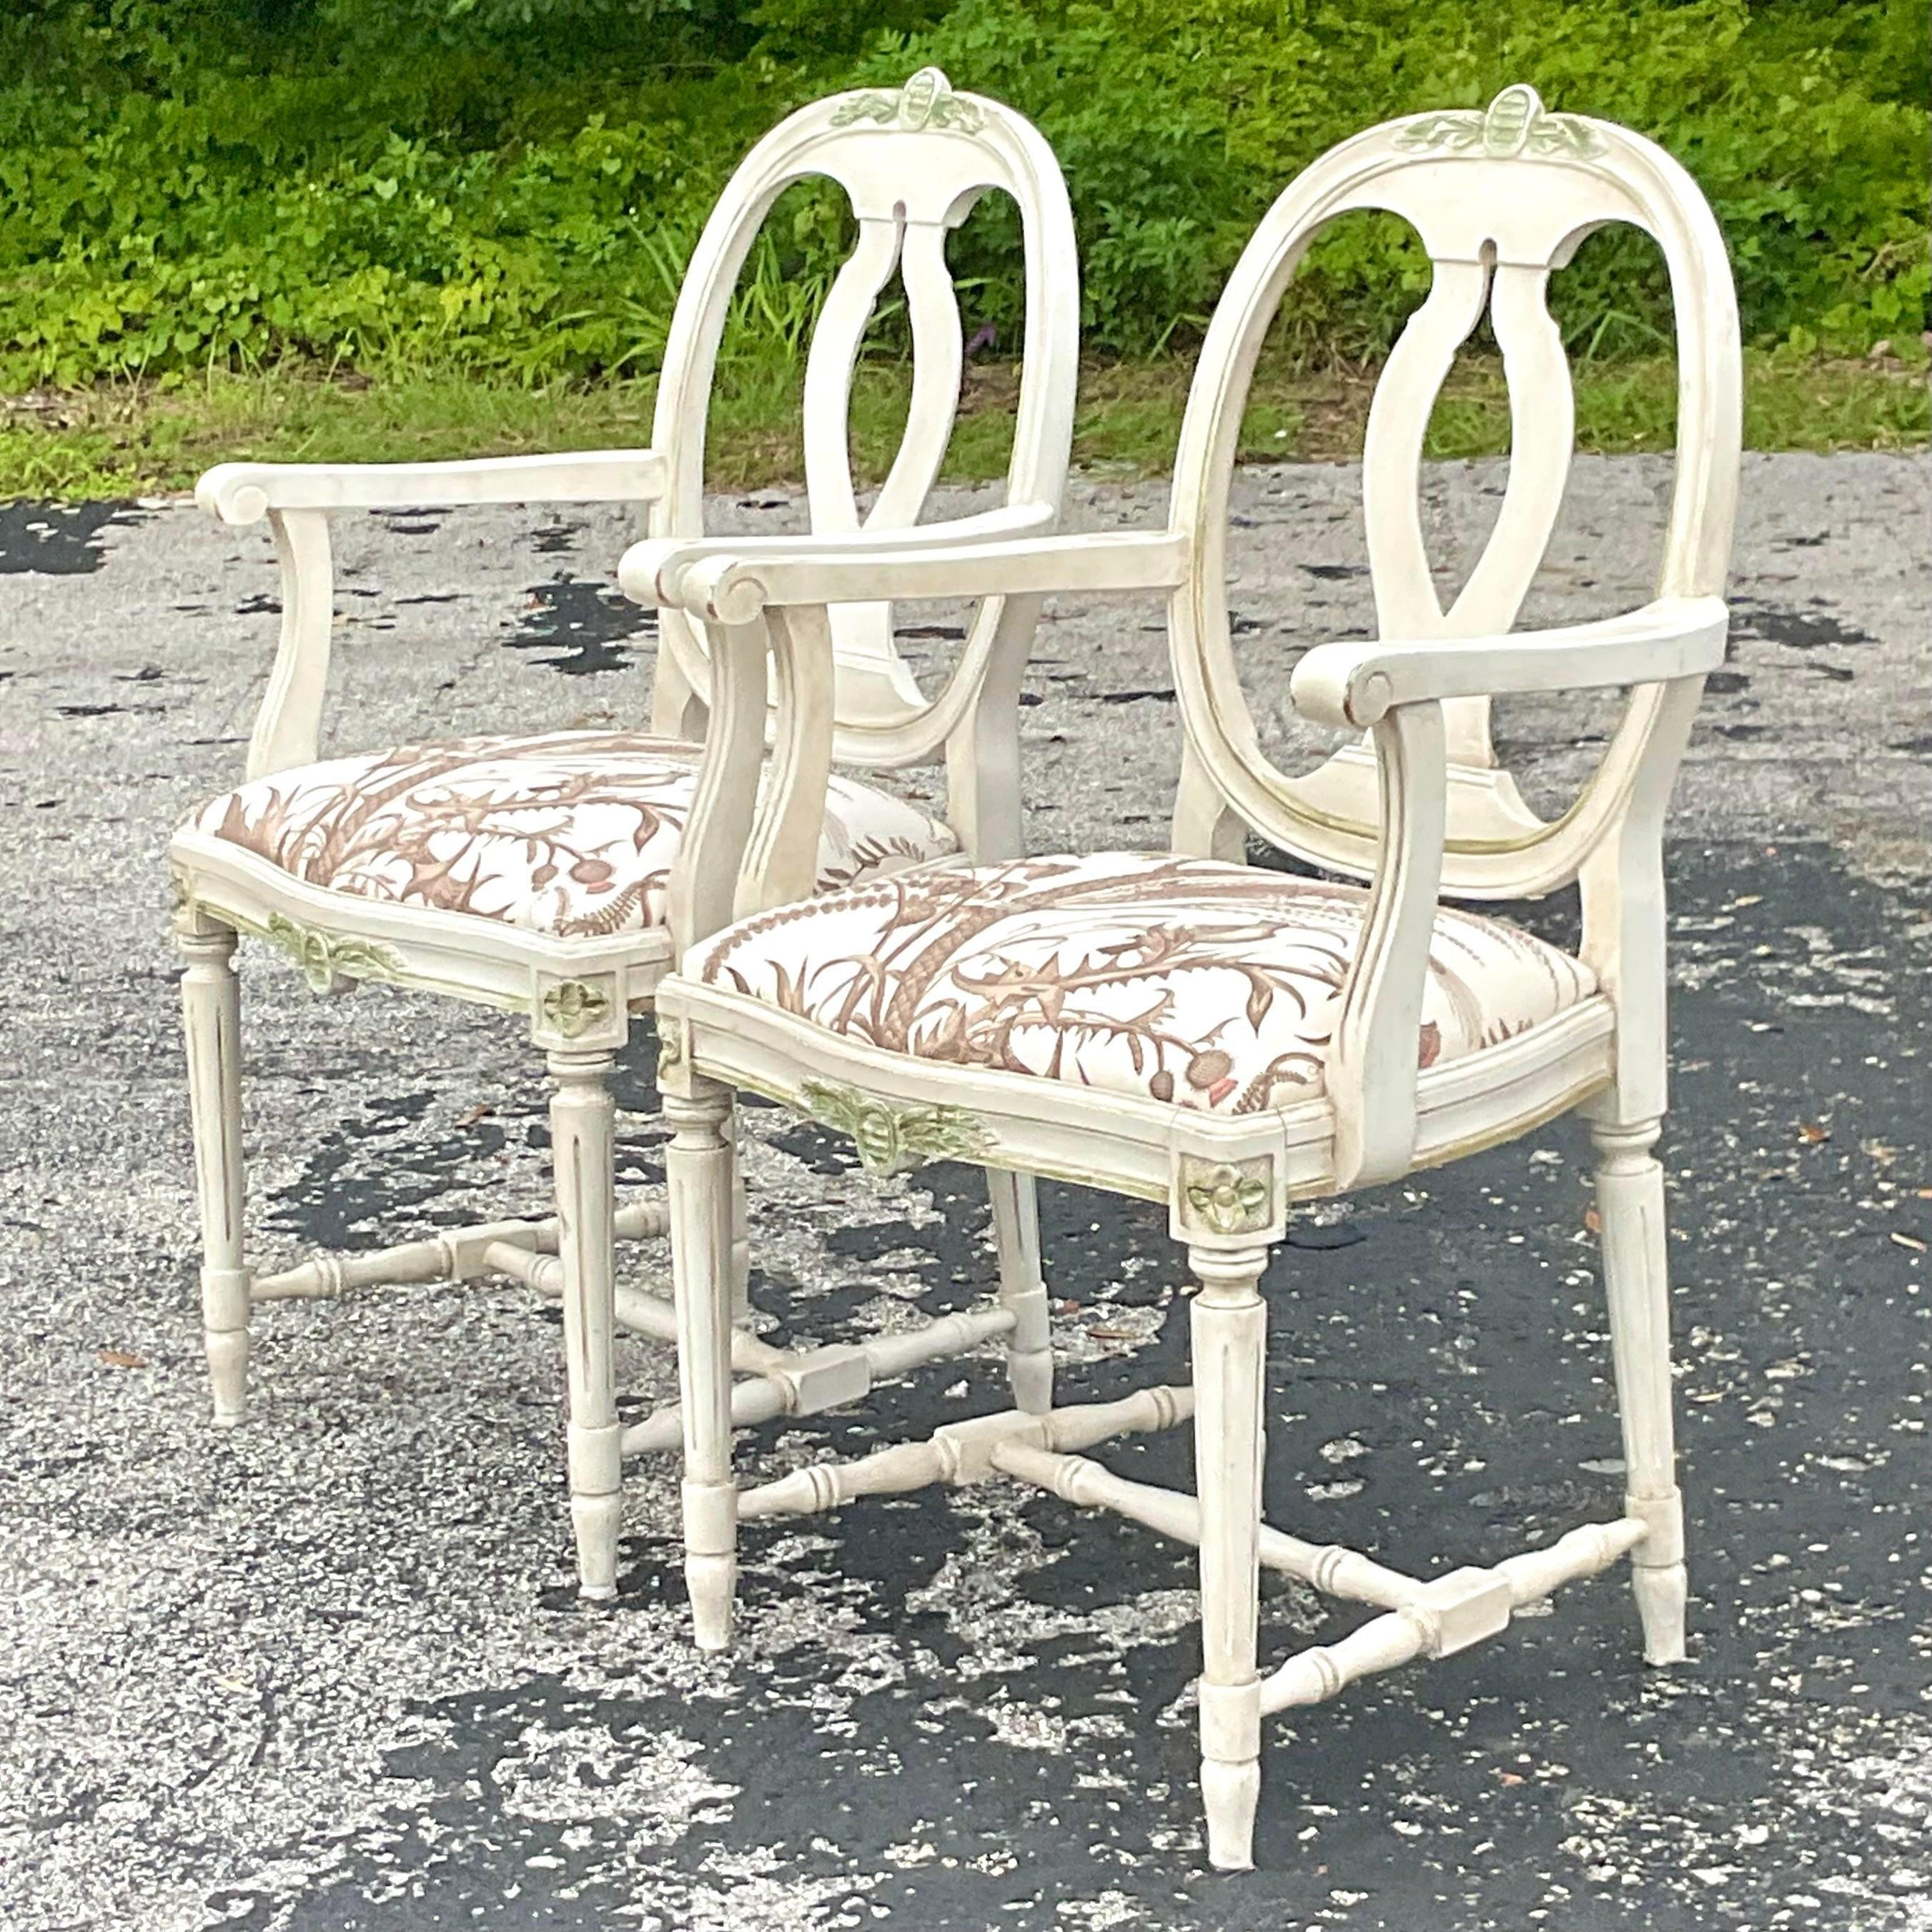 Upholstery Vintage Regency Swedish Gustavian Arm Chairs - a Pair For Sale